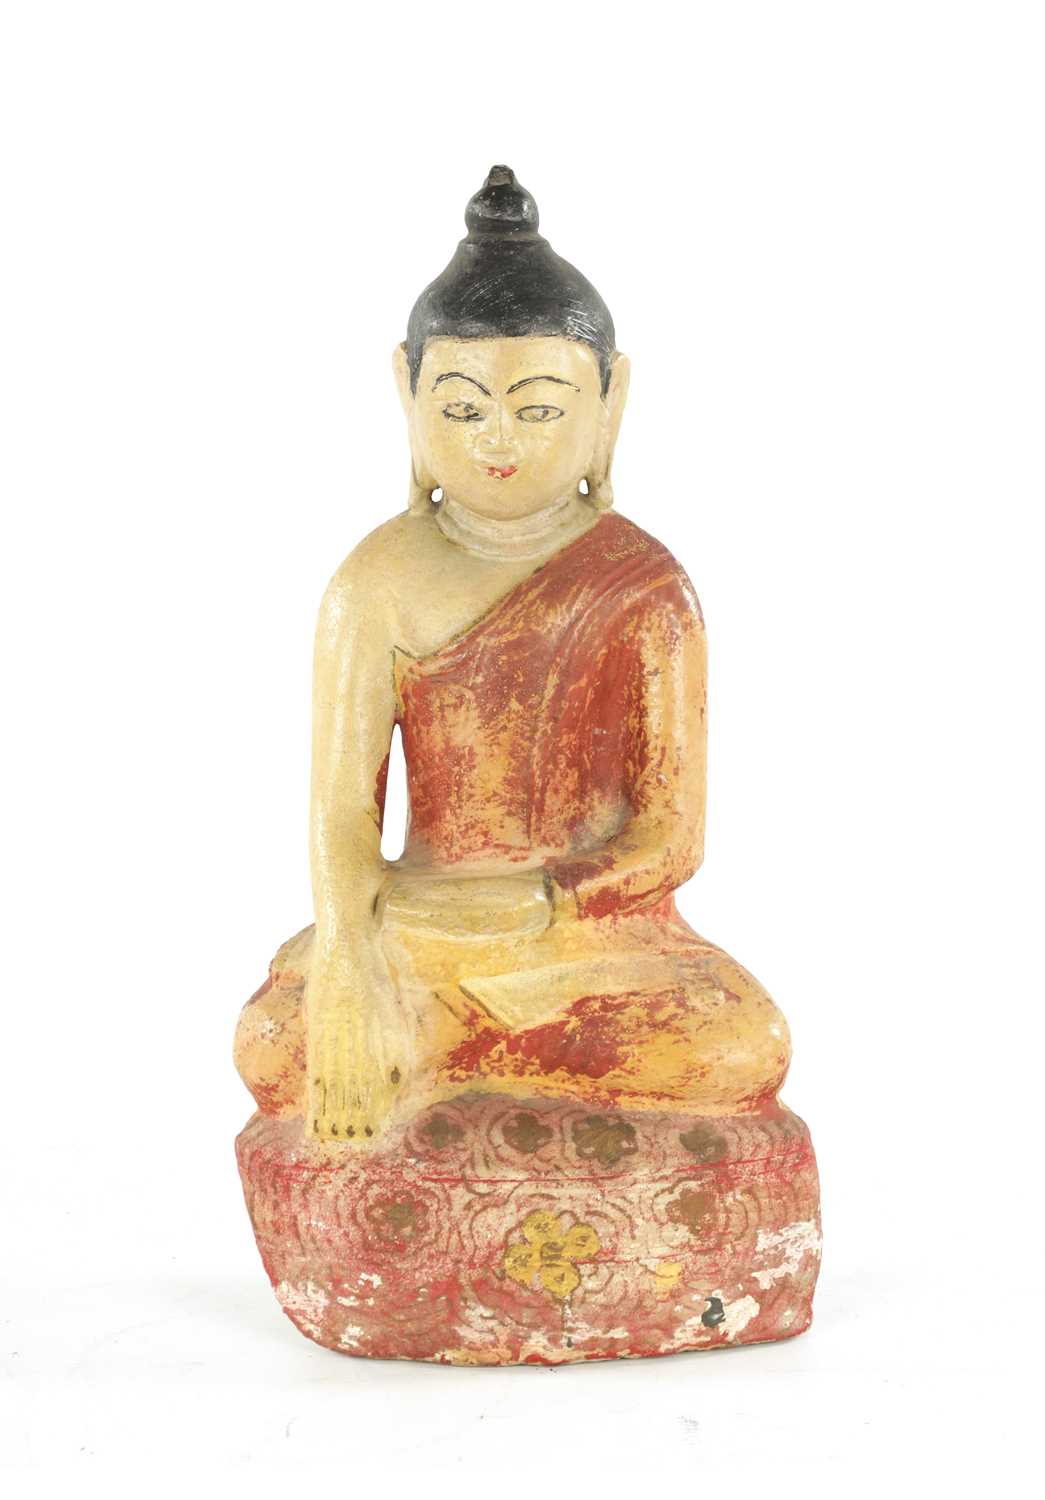 A 19TH CENTURY CARVED ALABASTER PAINTED BURMESE BUDDHA